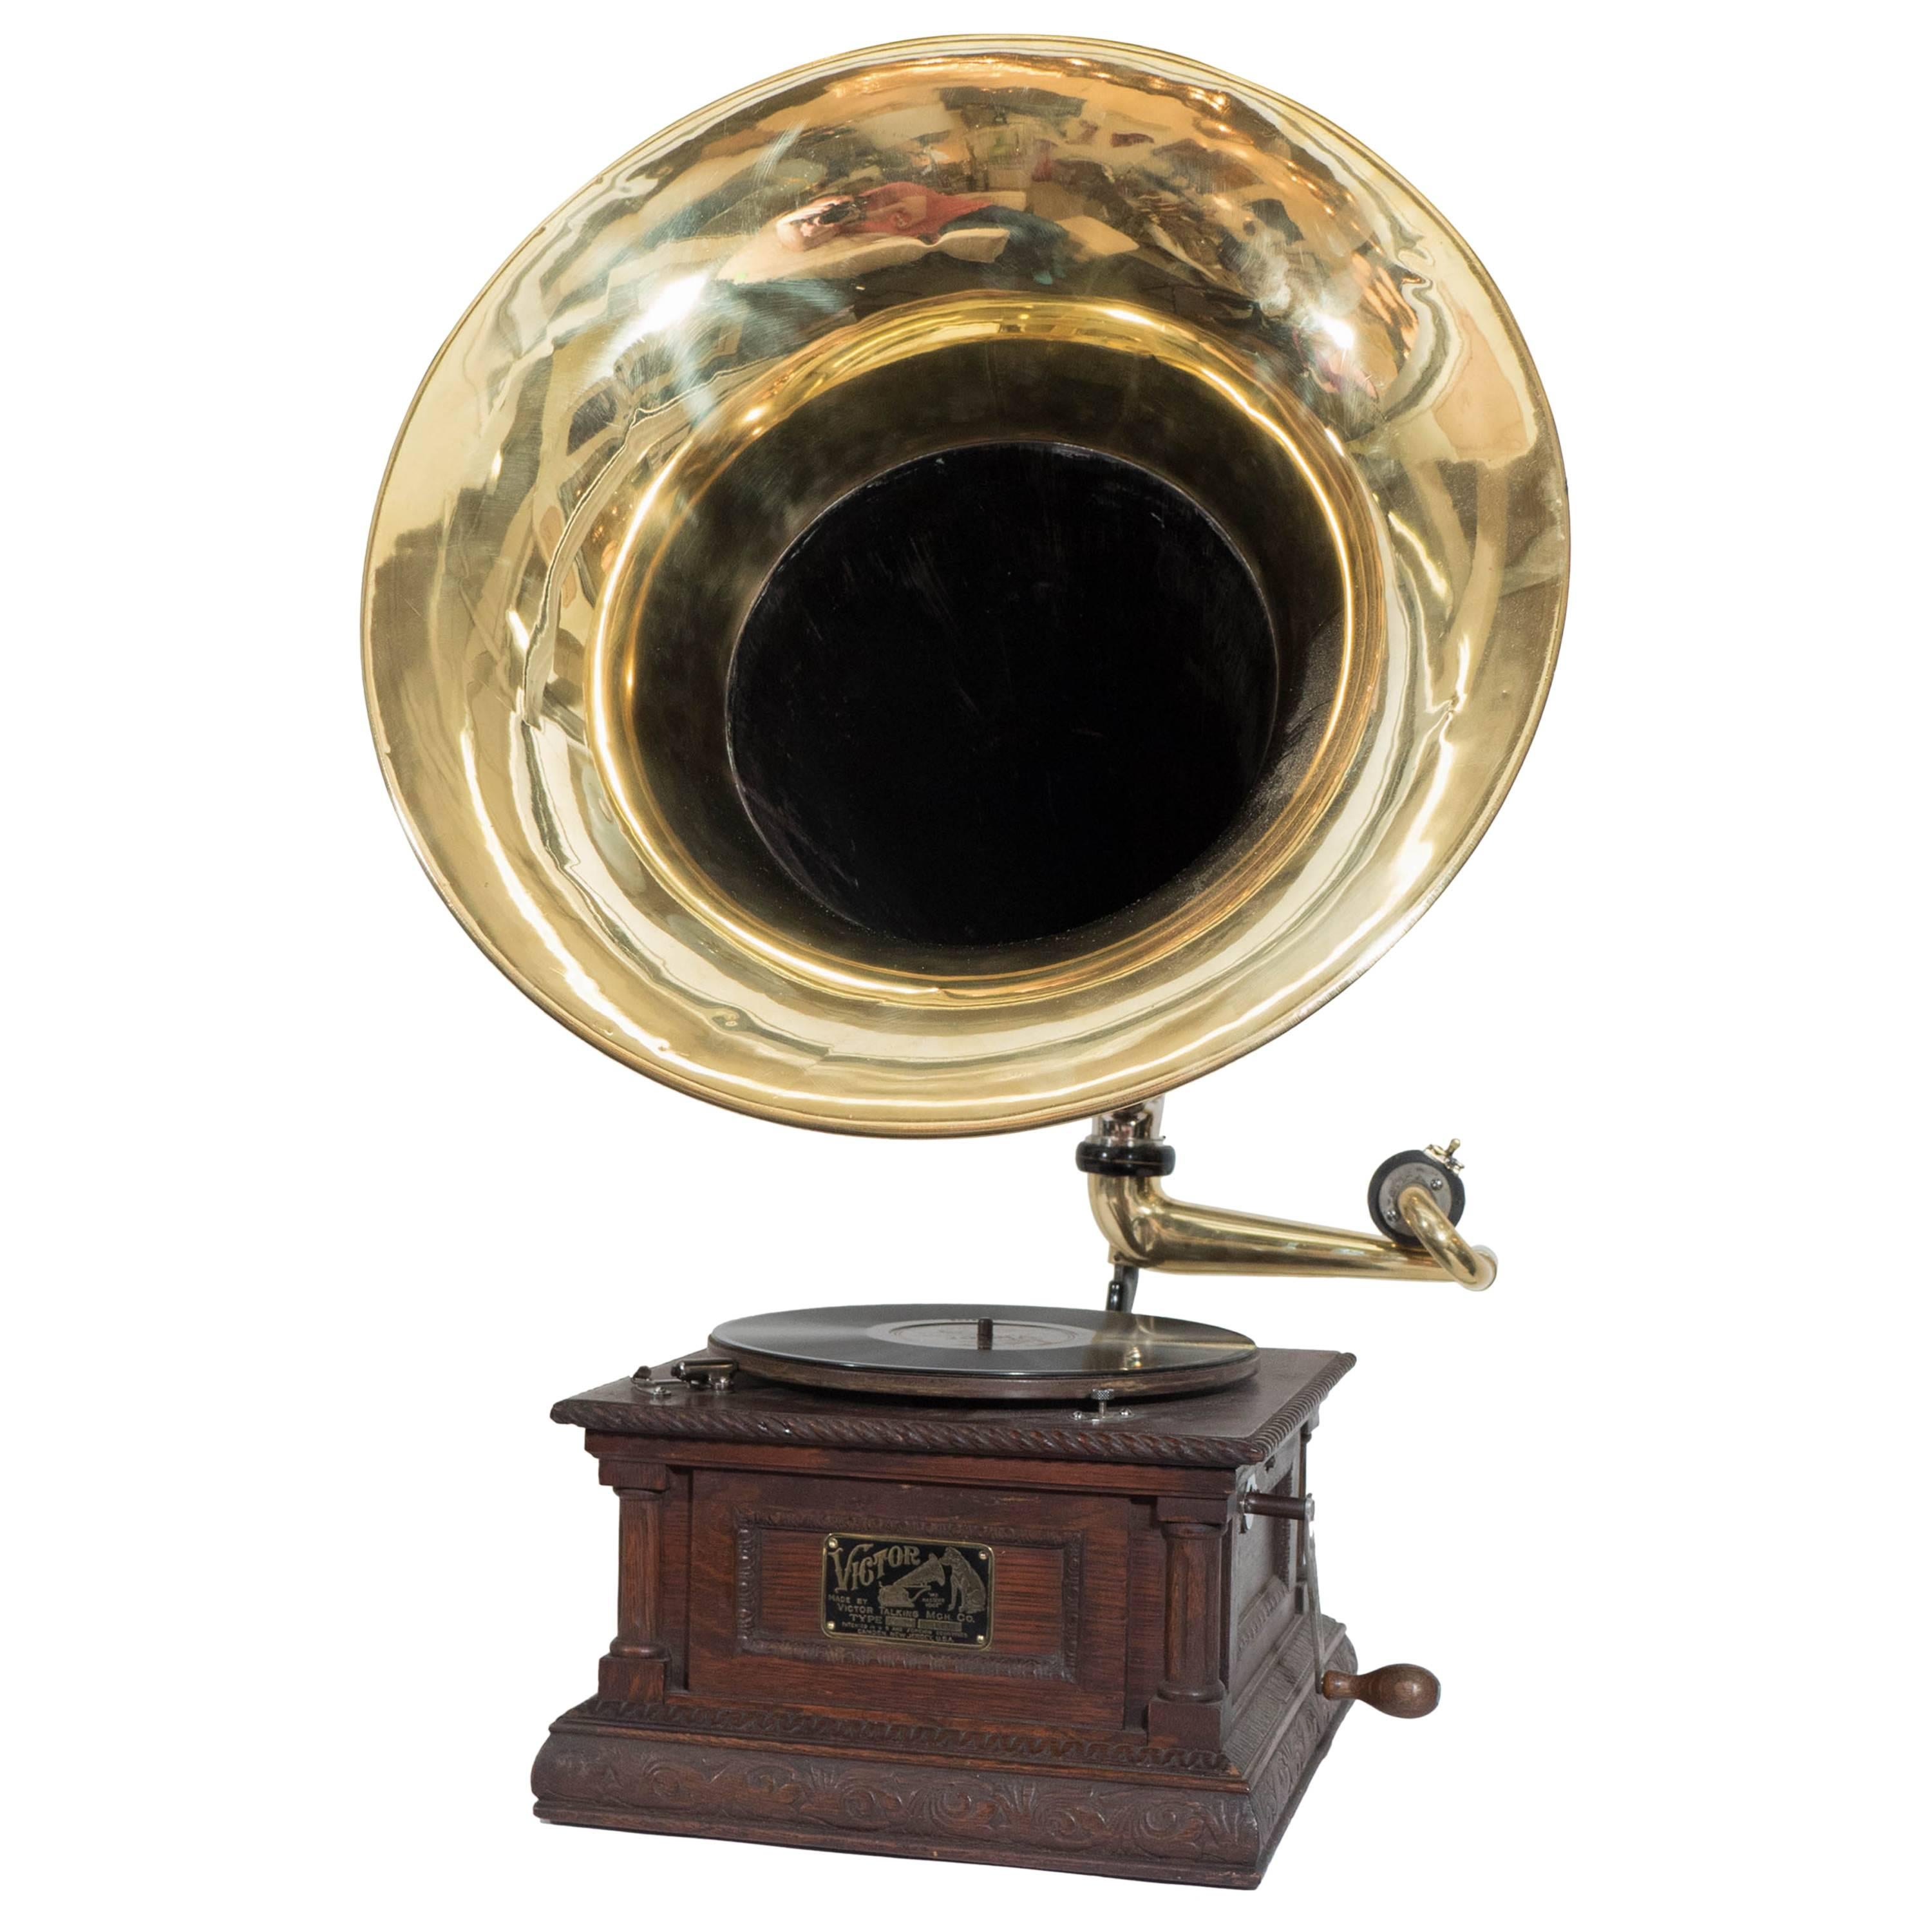 Early 20th Century Victor 'Monarch Special' Phonograph